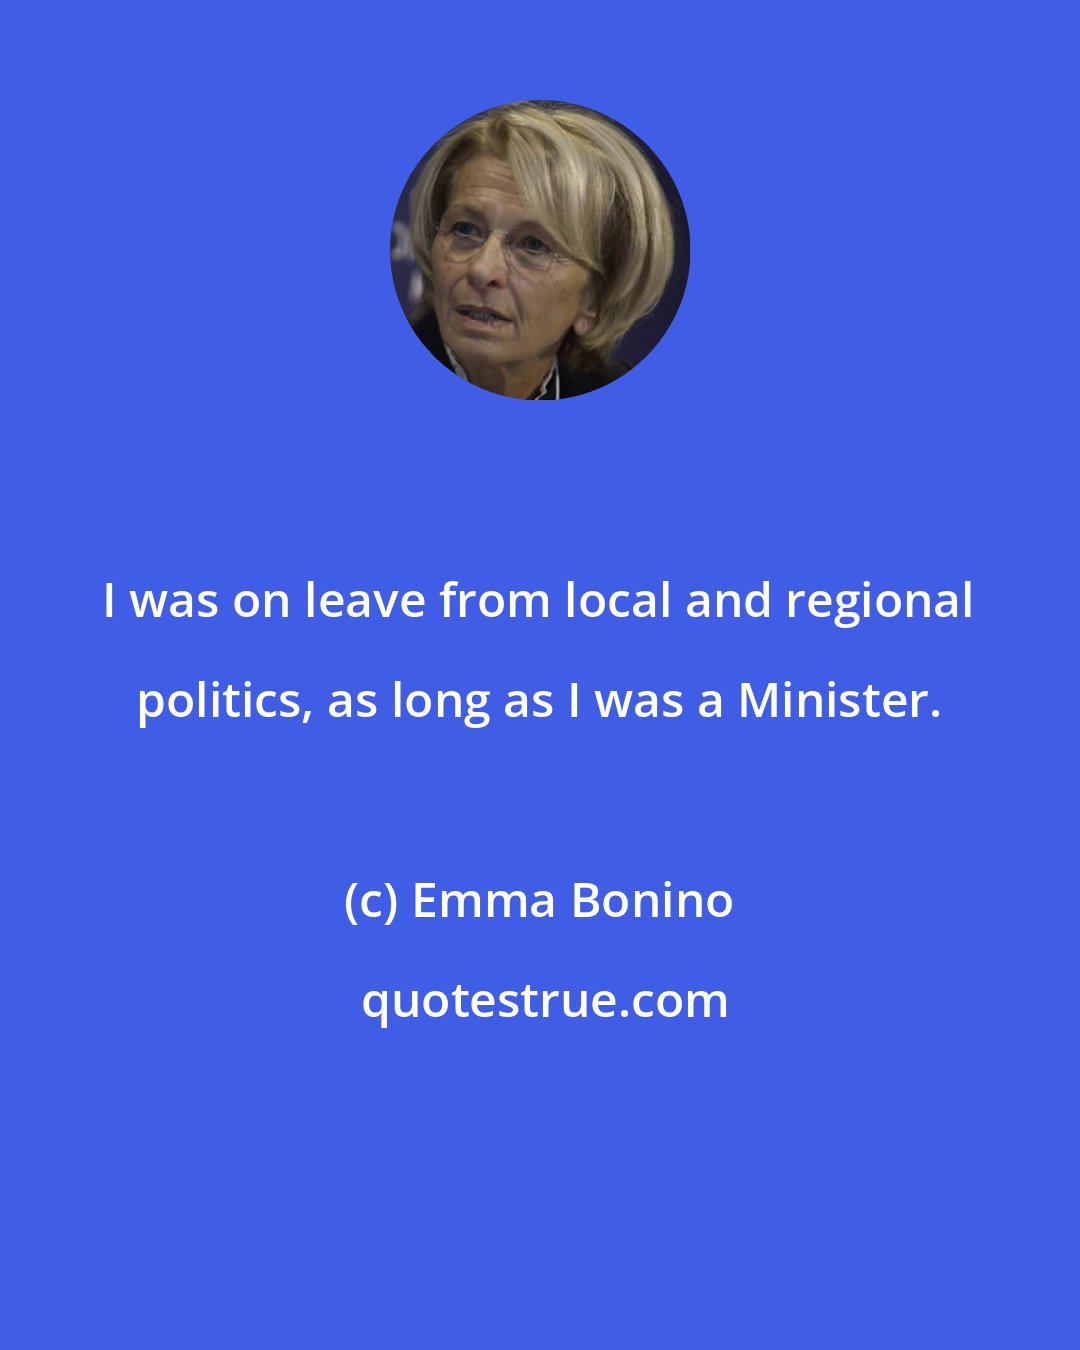 Emma Bonino: I was on leave from local and regional politics, as long as I was a Minister.